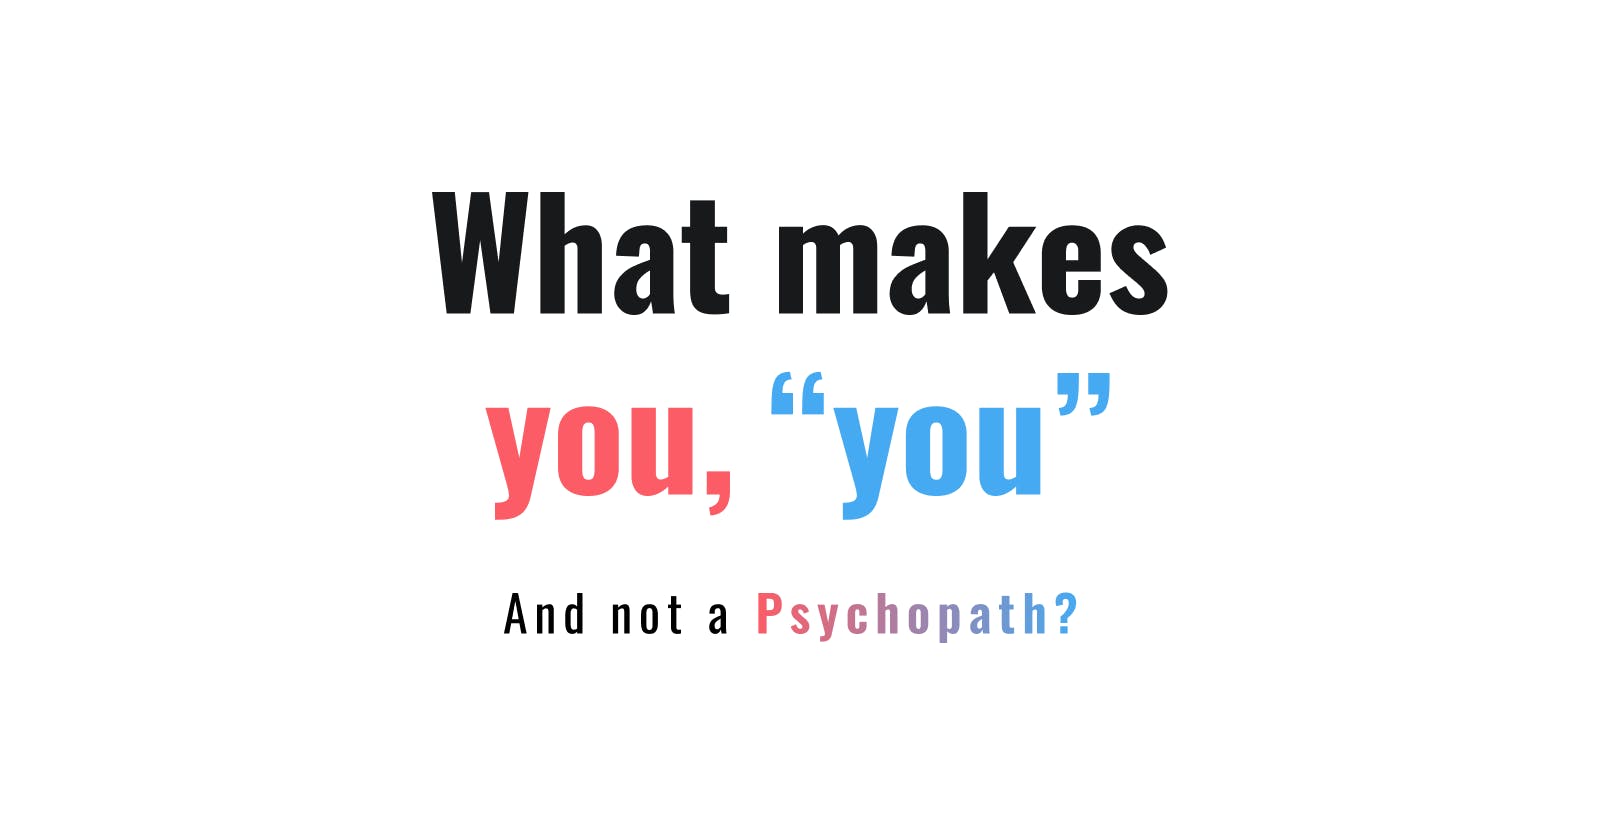 Why are you not a Psychopath? Explained neurologically.